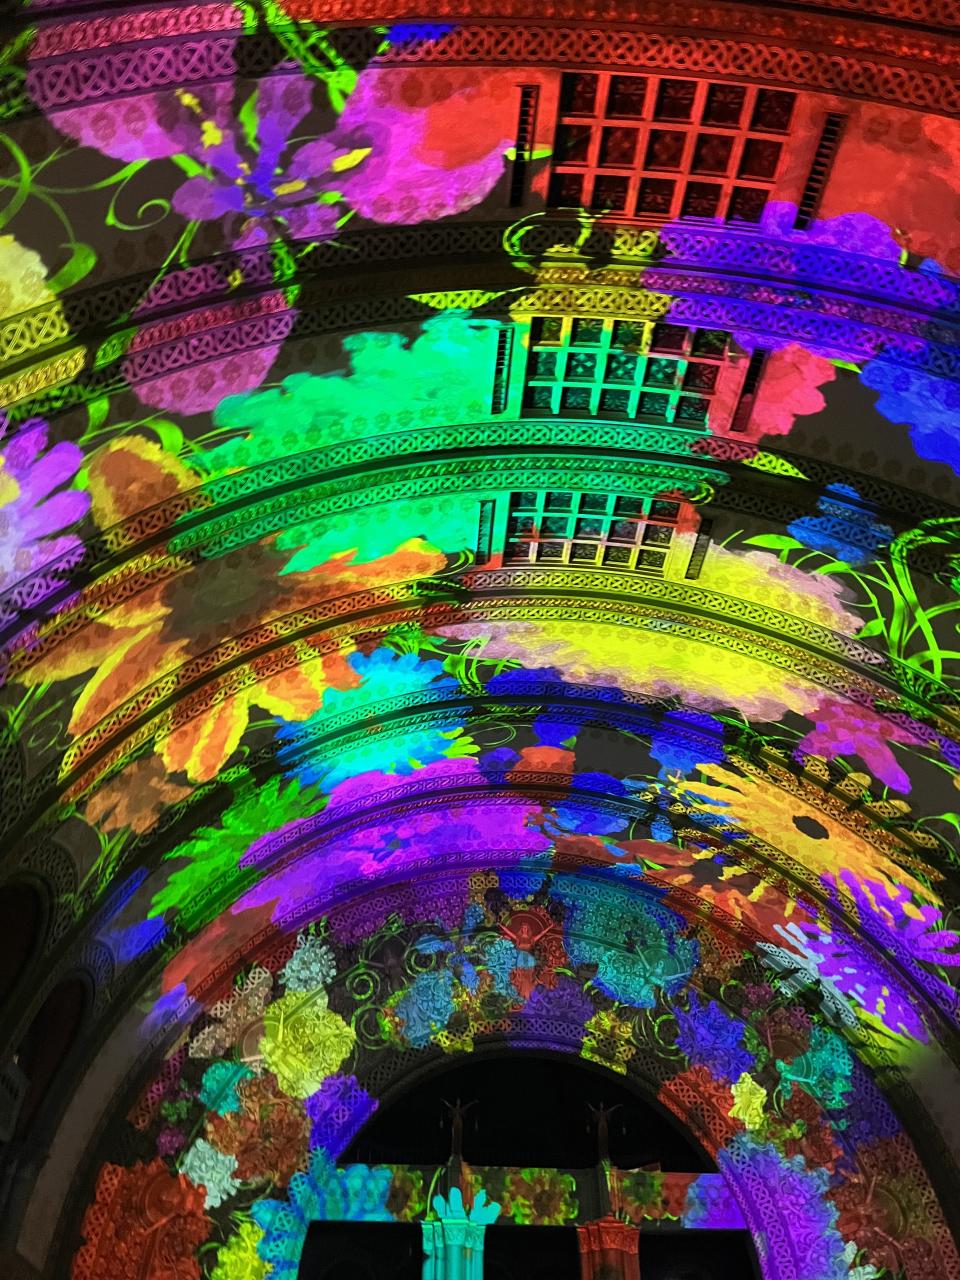 Part of the light show at Union Station in St. Louis.